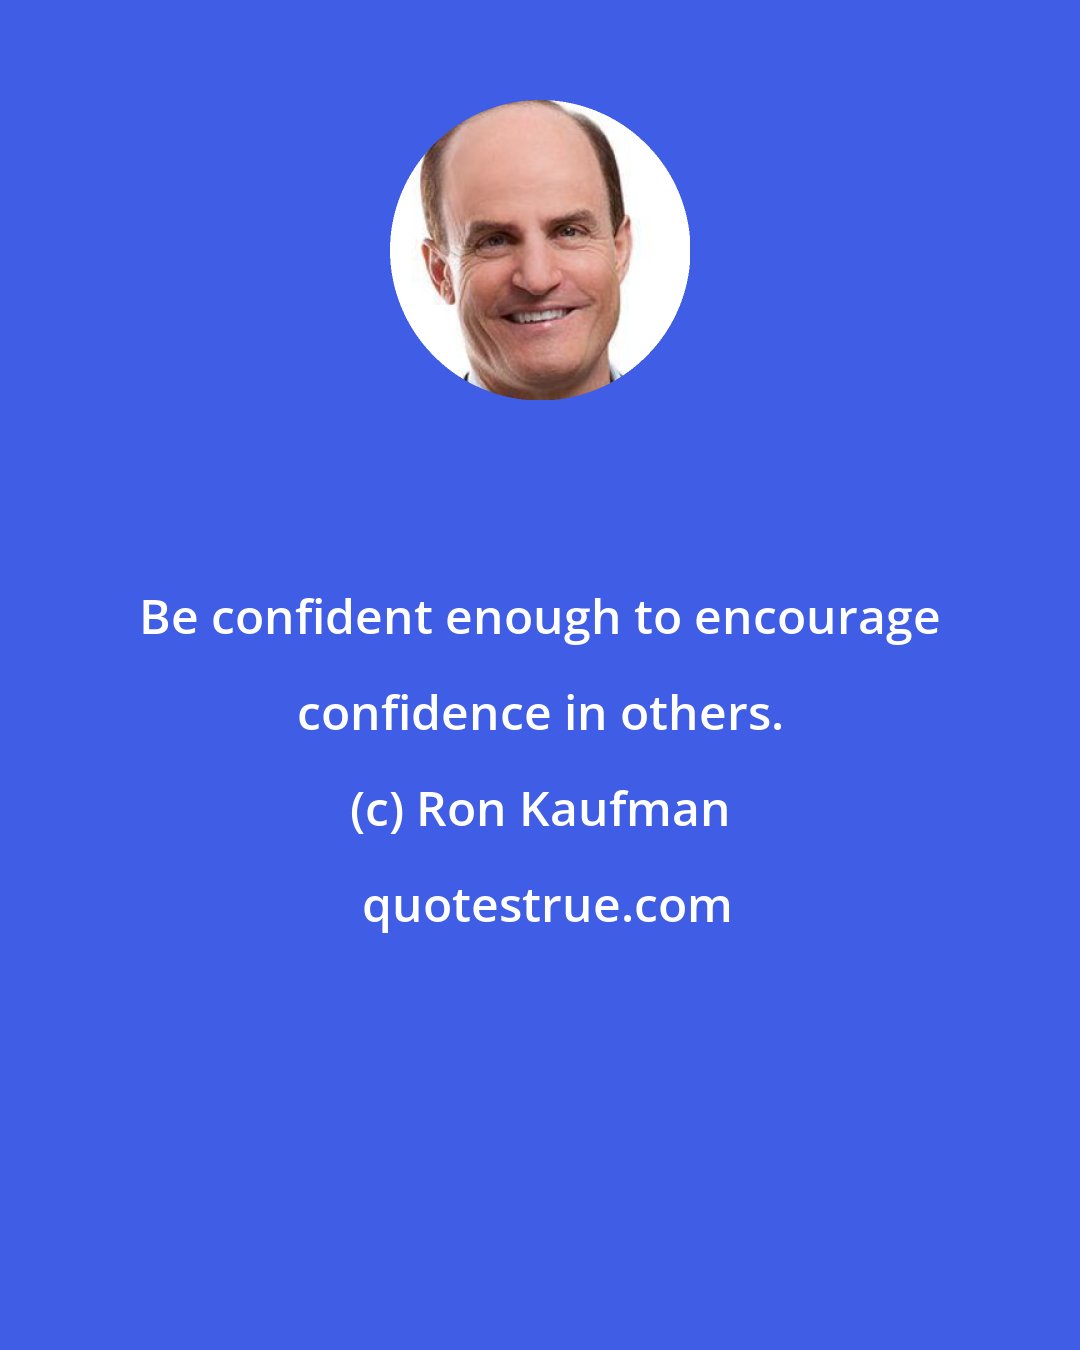 Ron Kaufman: Be confident enough to encourage confidence in others.